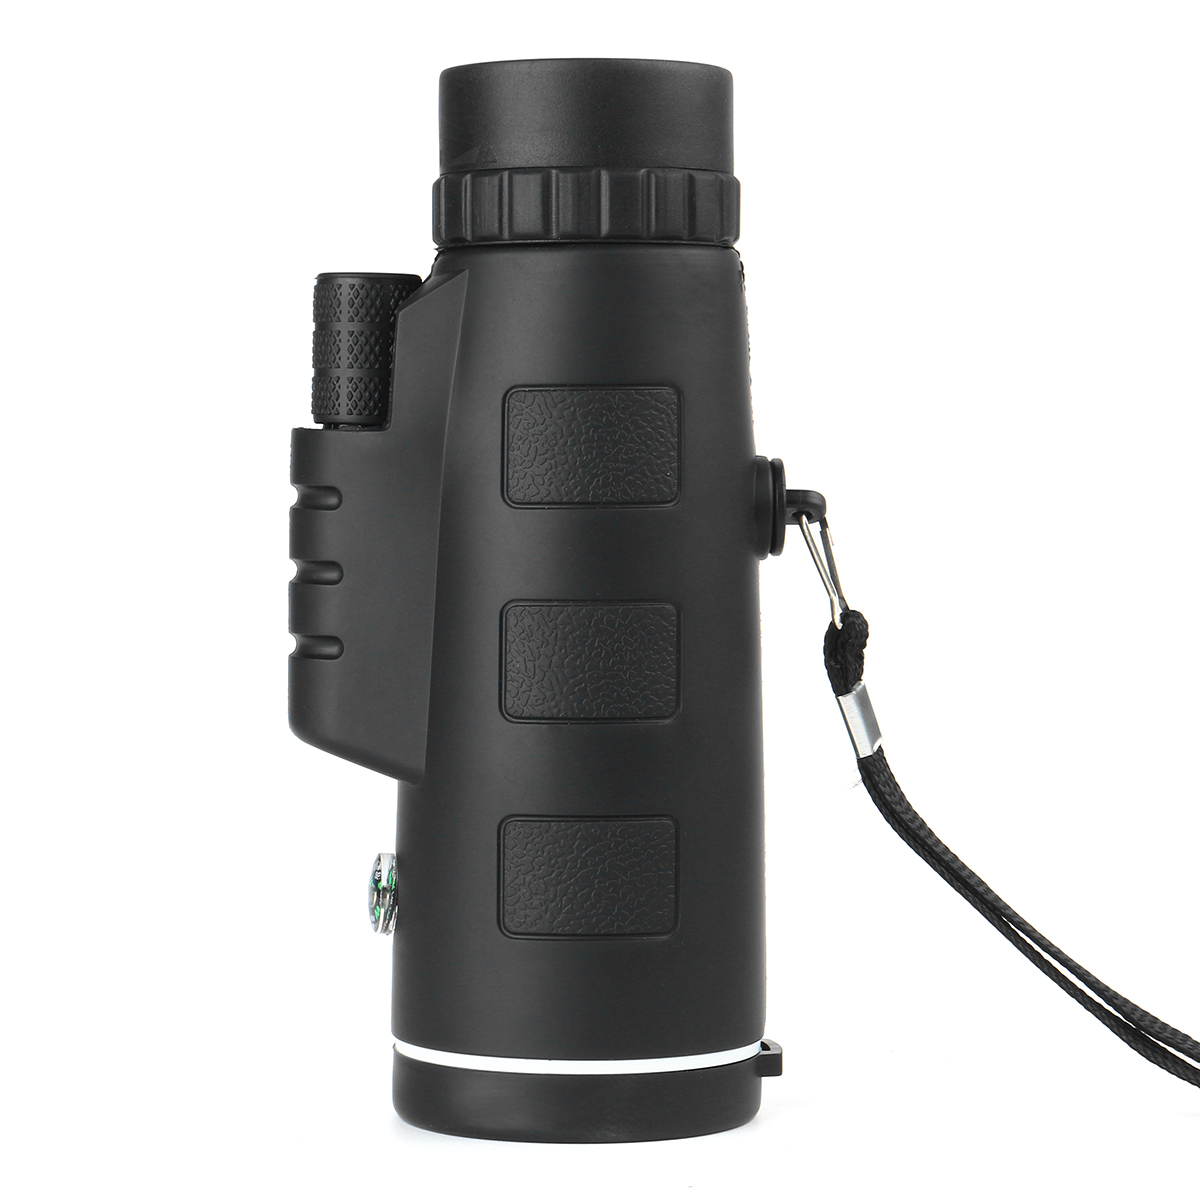 Find 40x60 50mm Wide Angle Multifunctional Low Light Level Night Vision HD Waterproof Monocular Camping Telescope for Sale on Gipsybee.com with cryptocurrencies